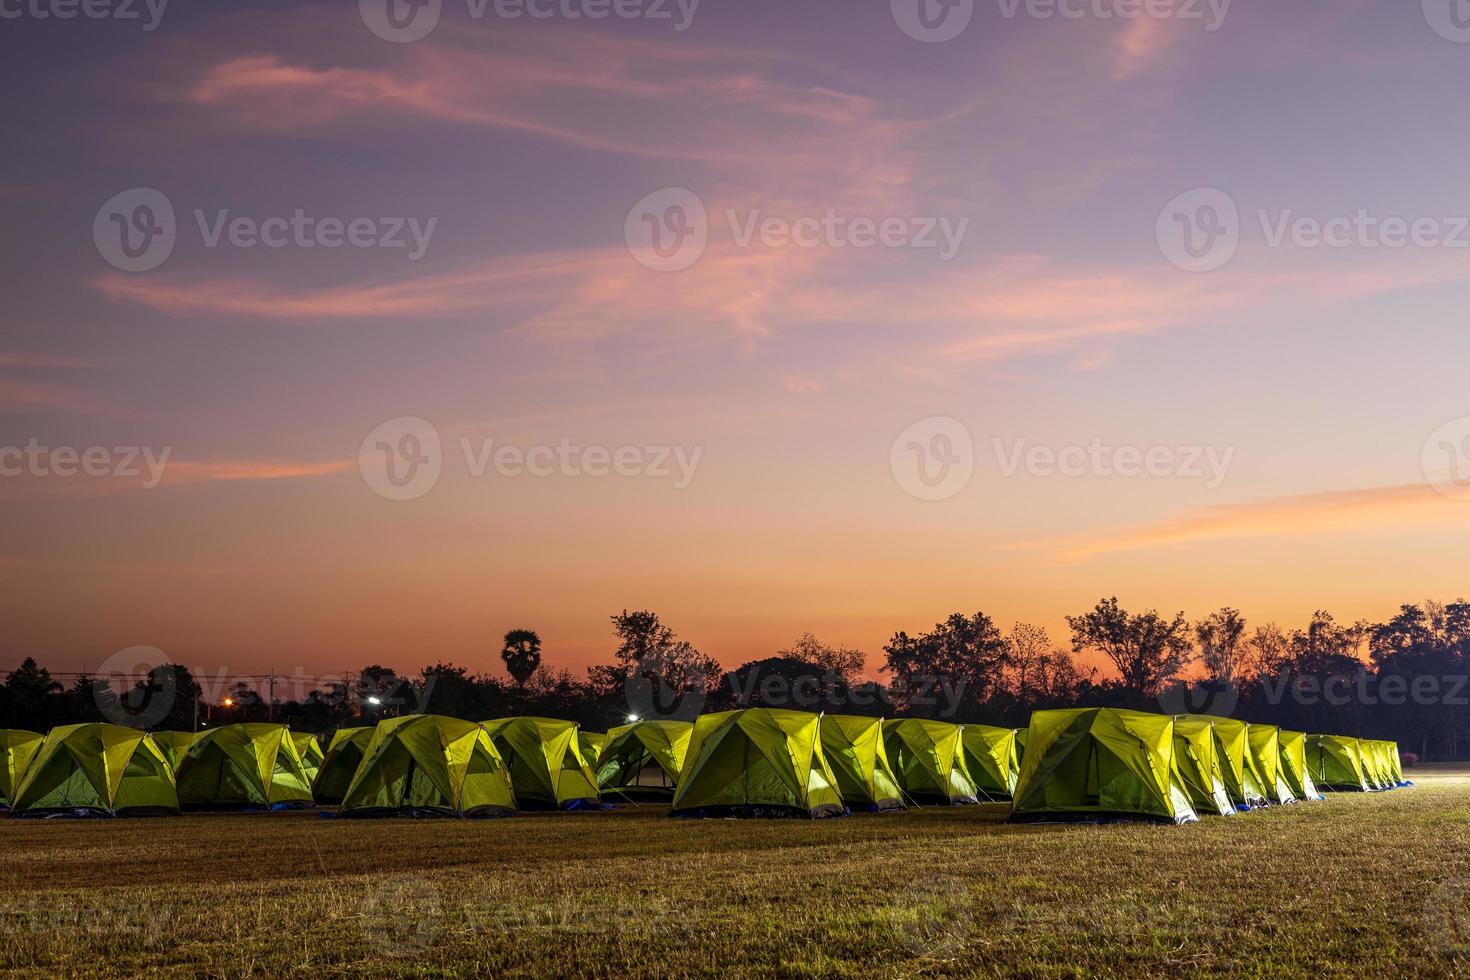 Scenery of rows of green canvas camping tents with floodlights installed on the lawn. photo